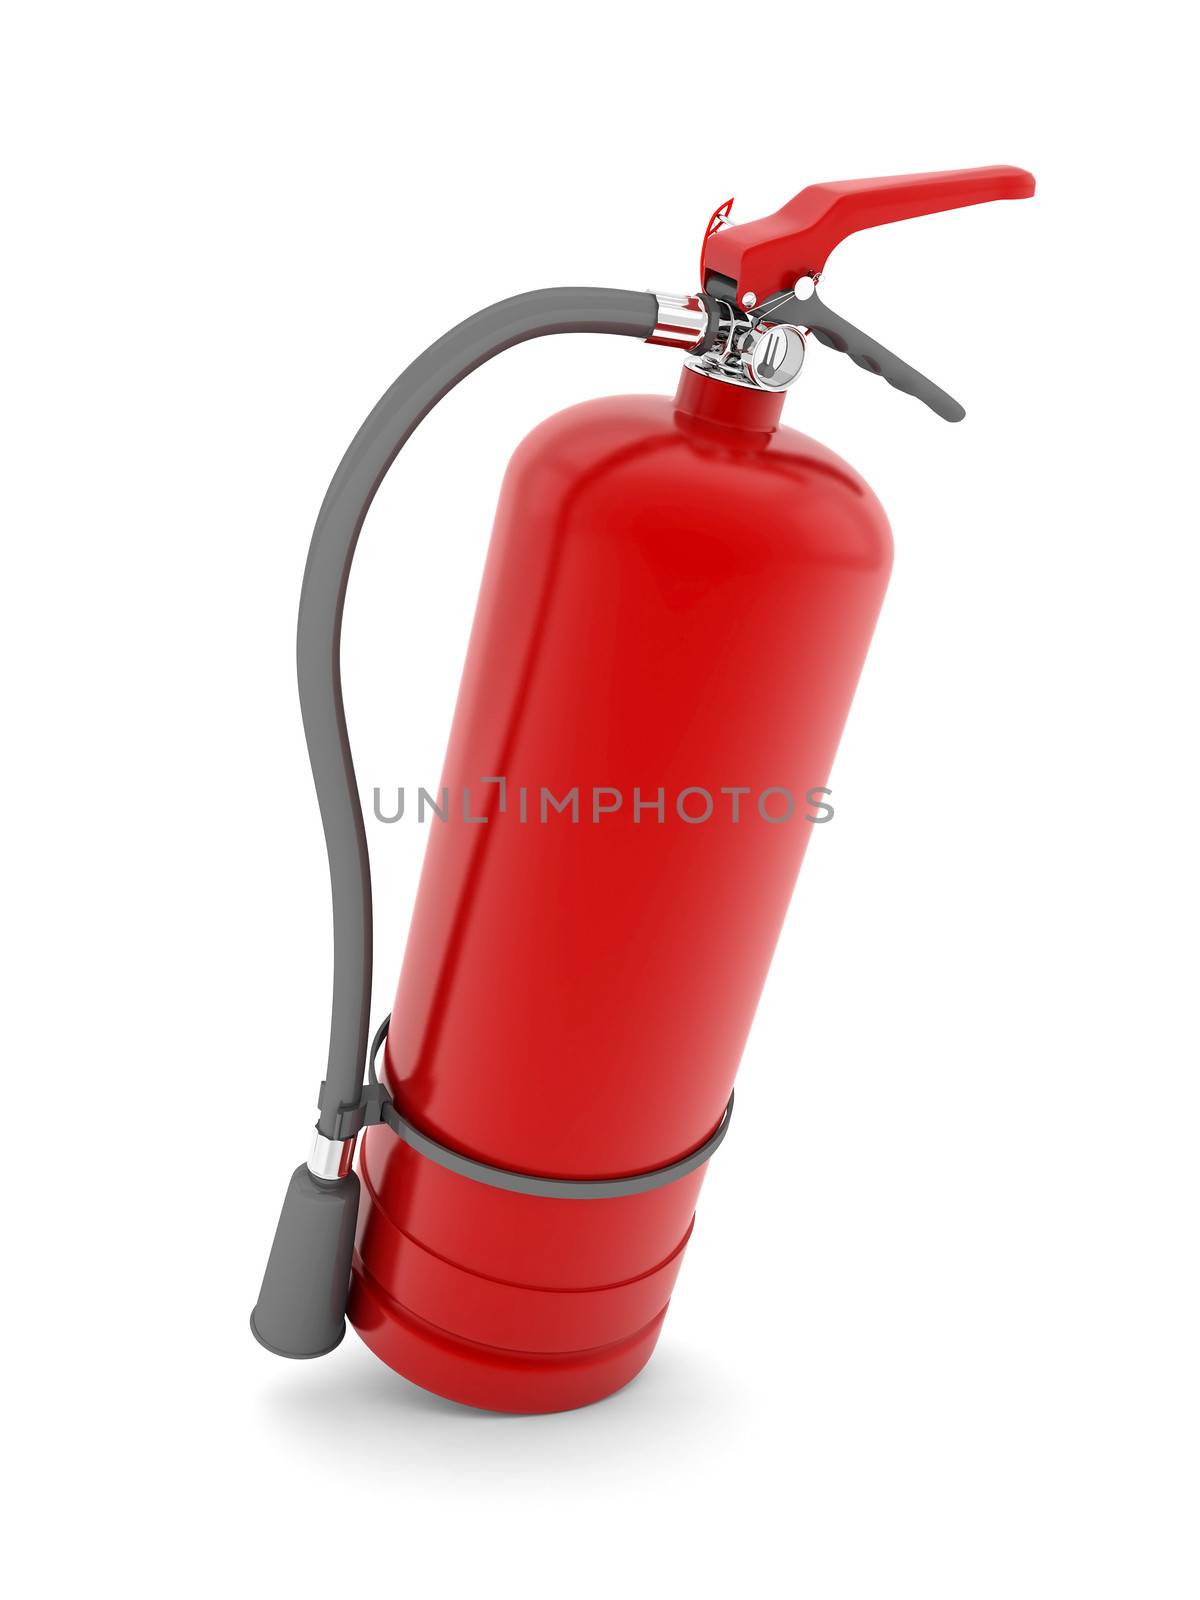 red fire extinguisher by mrgarry